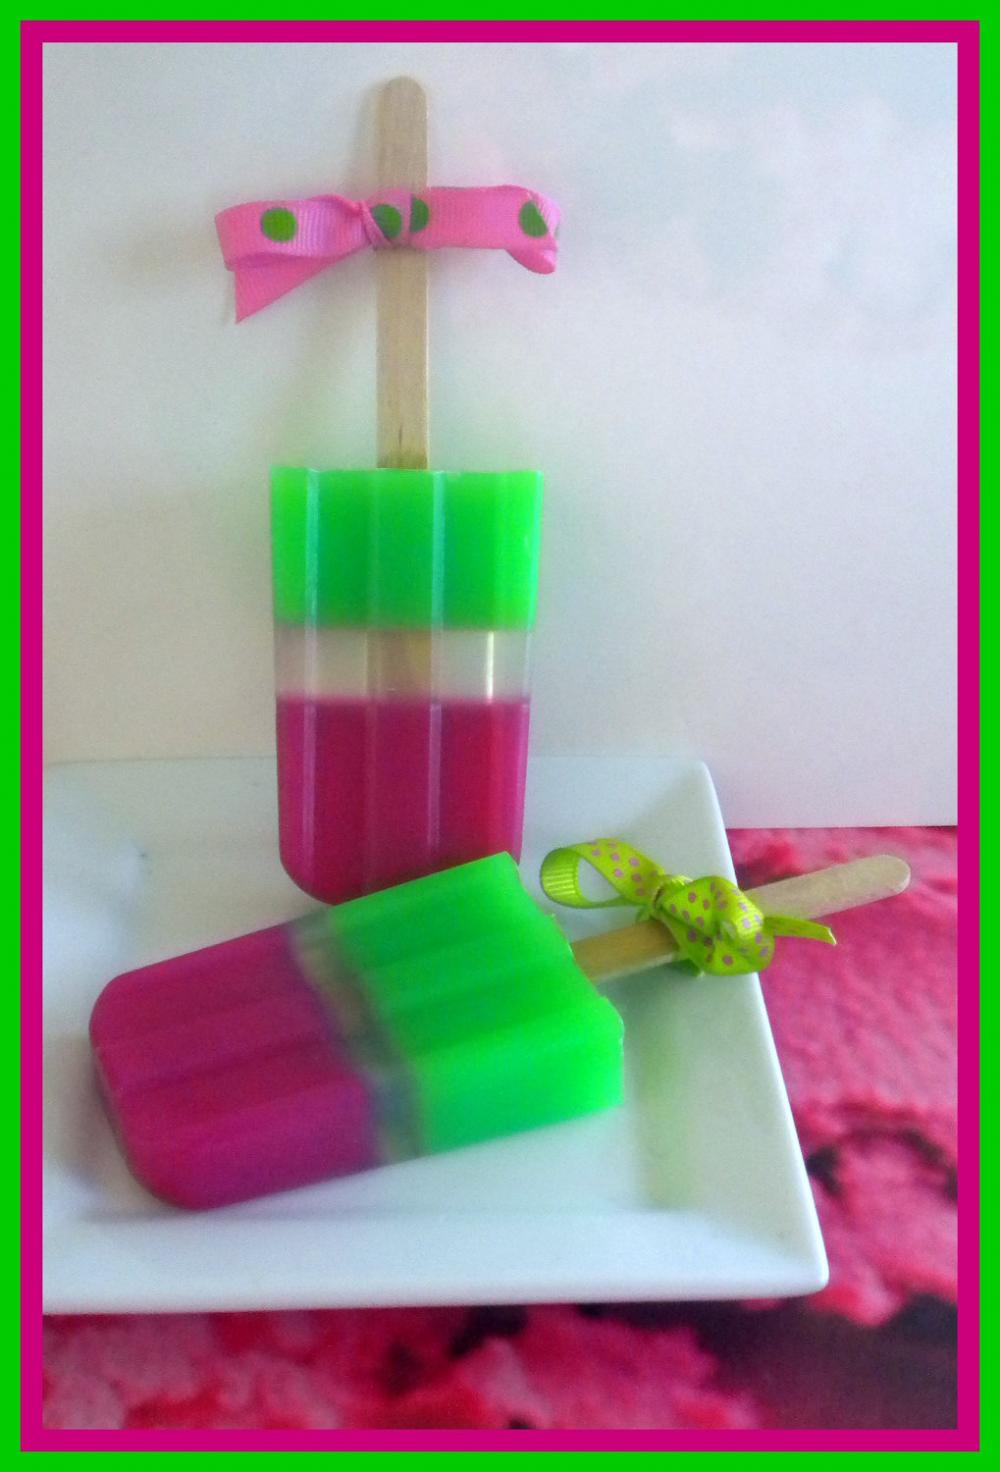 Soapsicle - Watermelon Green Apple - Soap Popsicle - Party Favors